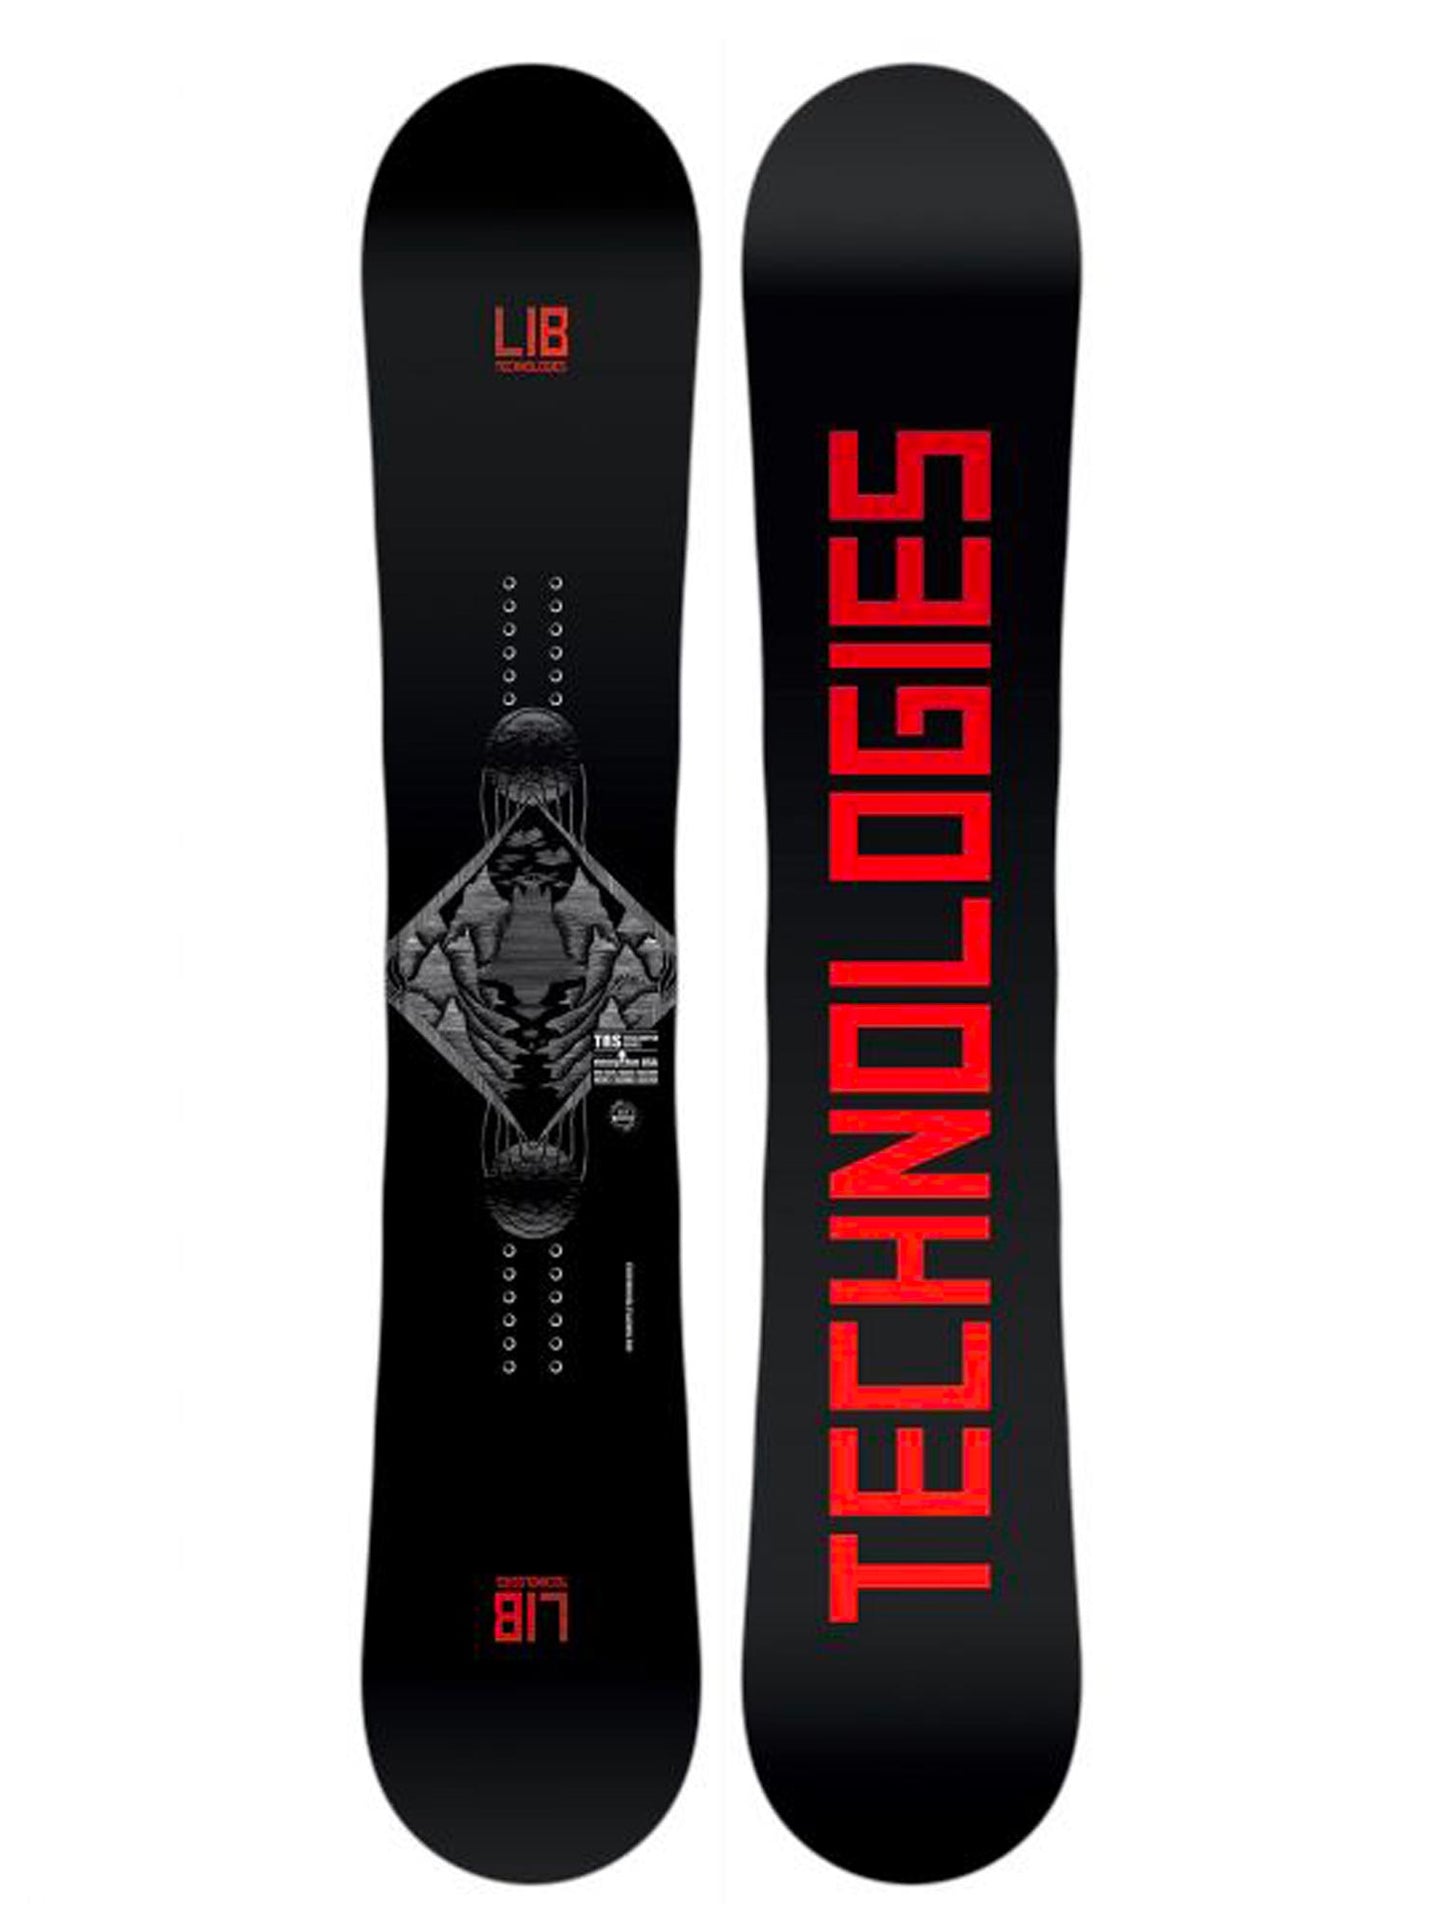 Lib Tech TRS snowboard, black and red